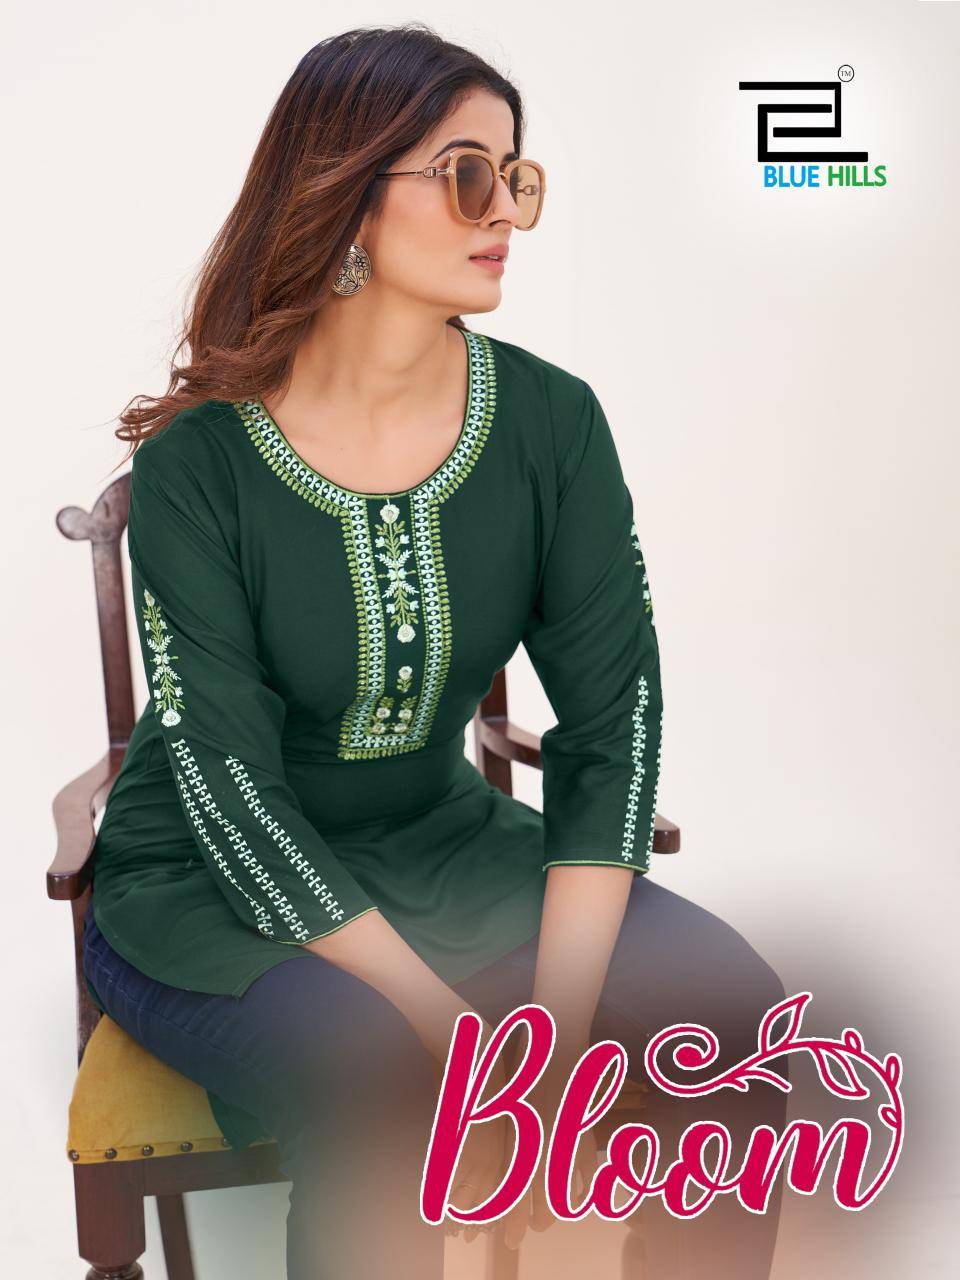 Bloom By Blue Hills 1001 To 1006 Series Designer Stylish Fancy Colorful Beautiful Party Wear & Ethnic Wear Collection Rayon With Work Tops At Wholesale Price